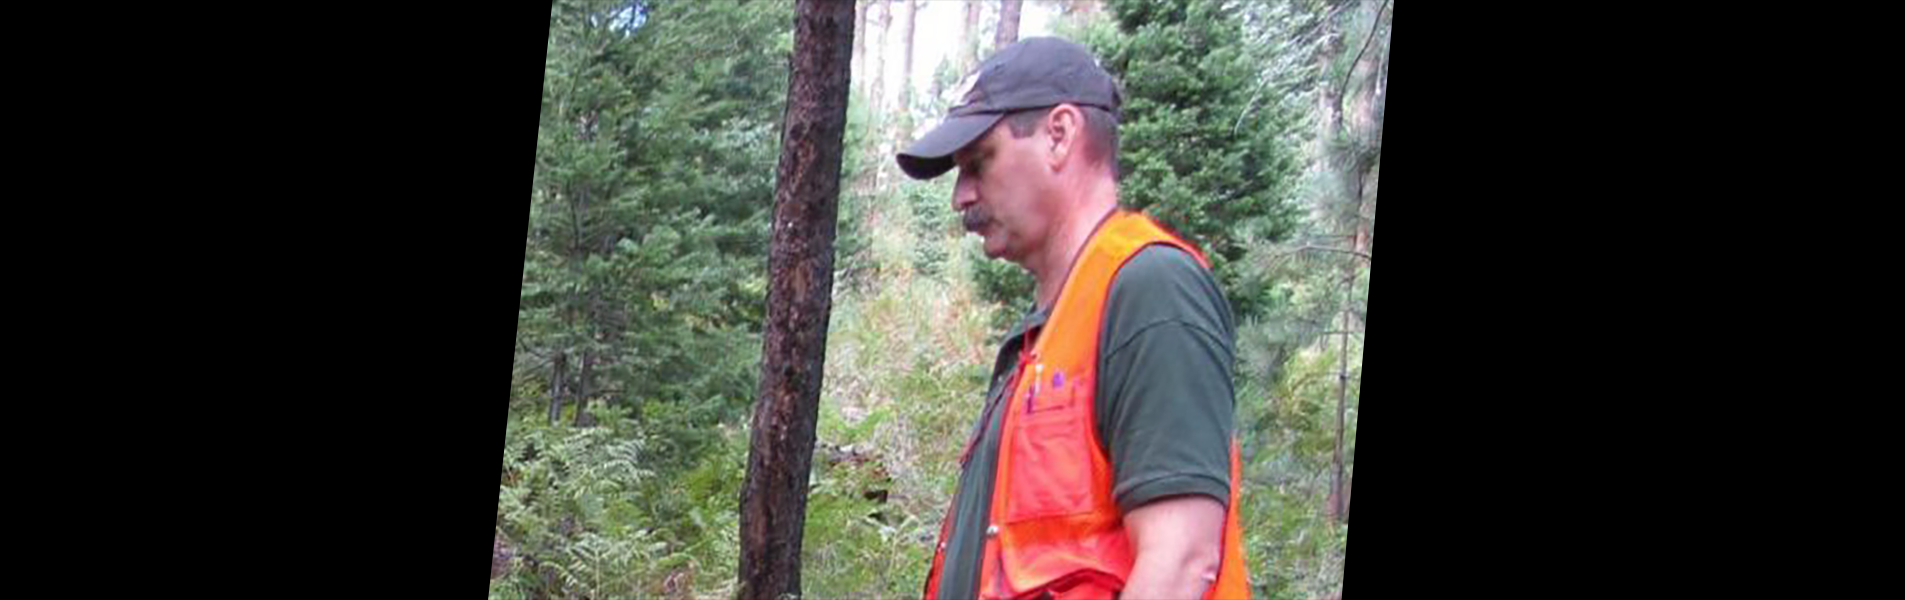 Tim Rubards, President of TYLD Corp, walking in the forest.